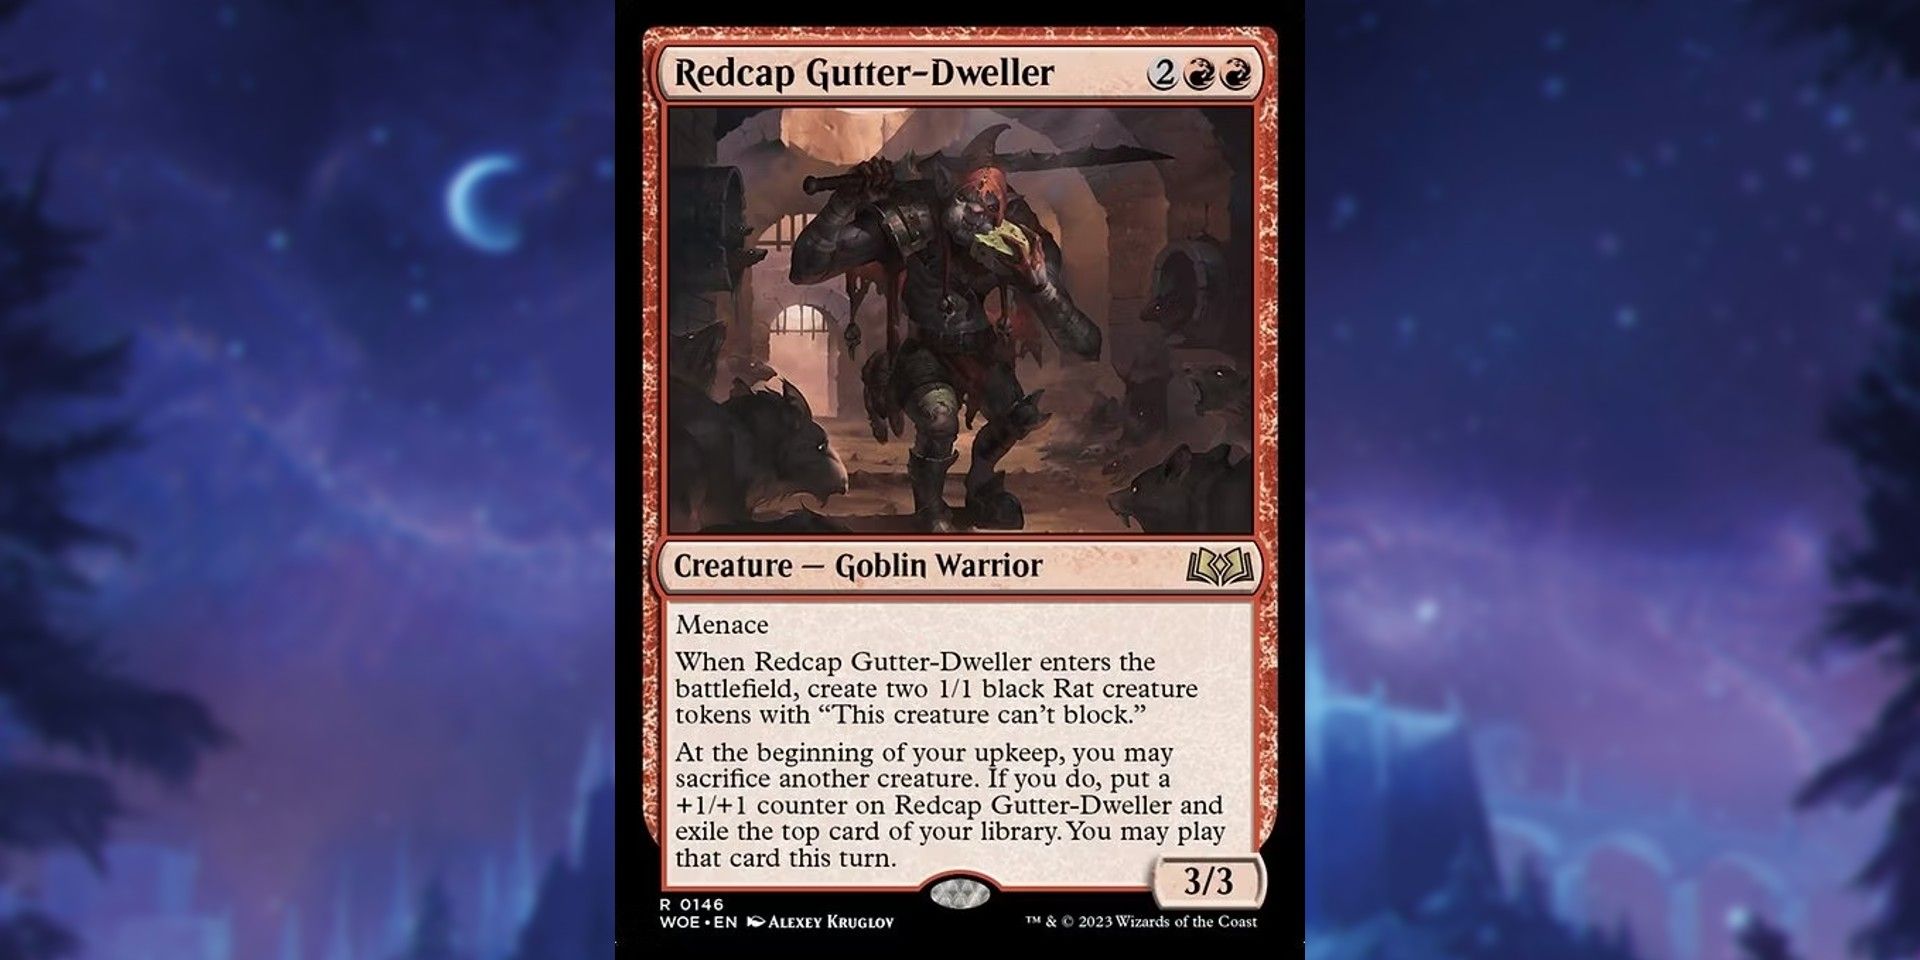 Redcap Gutter-Dweller card from Magic: The Gathering's Wilds of Eldraine